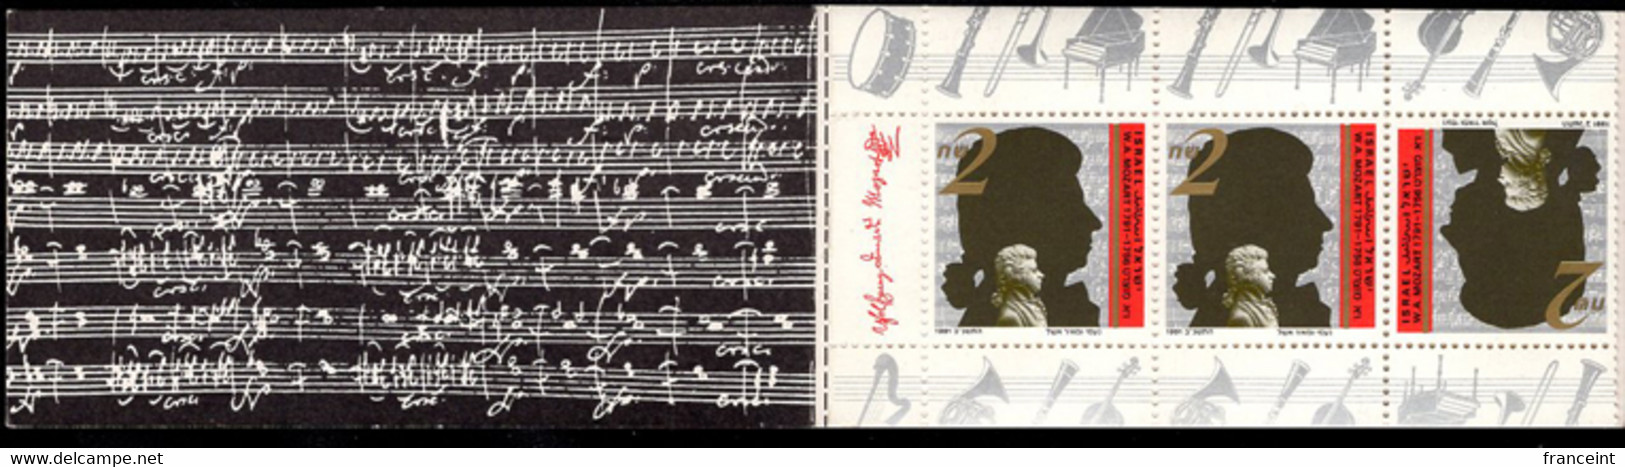 ISRAEL(1991) Mozart. Booklet Of 4 Stamps With Score From Don Giovanni On Inside Cover. - Markenheftchen